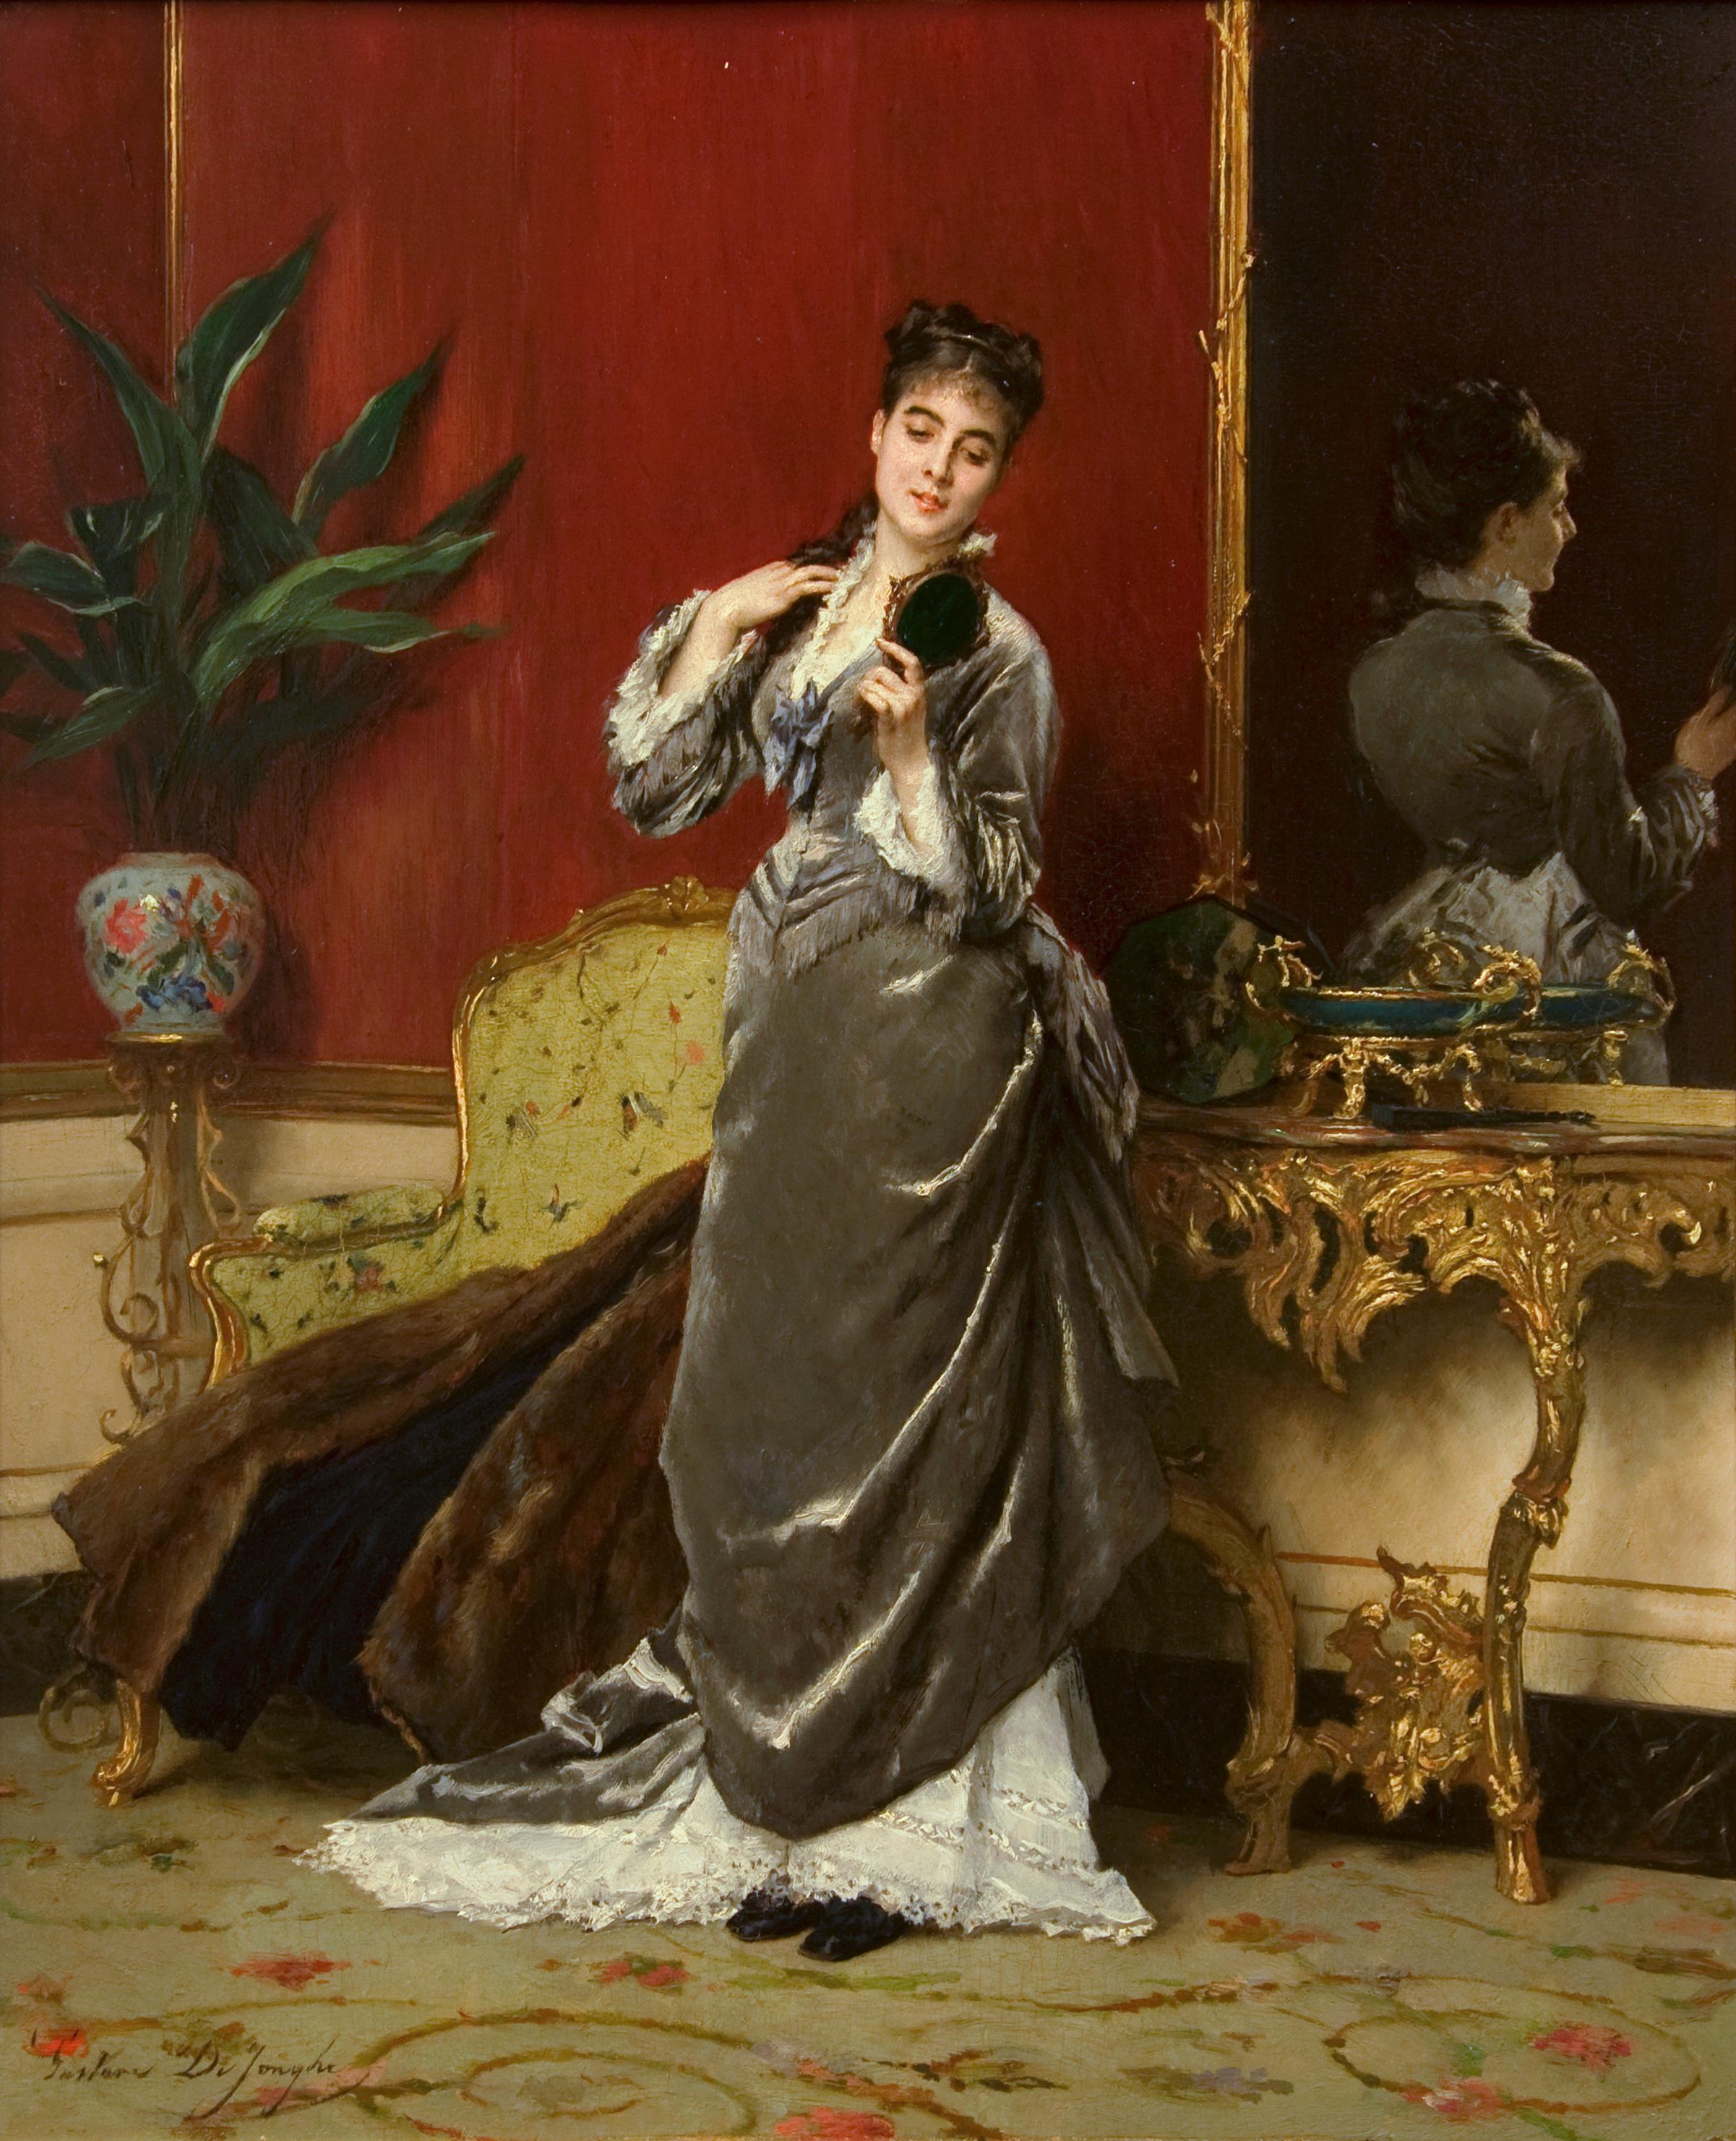 Gustave Léonhard de Jonghe Interior Painting - 19th Century Academic portrait of a woman titled "Dressing for the Ball"